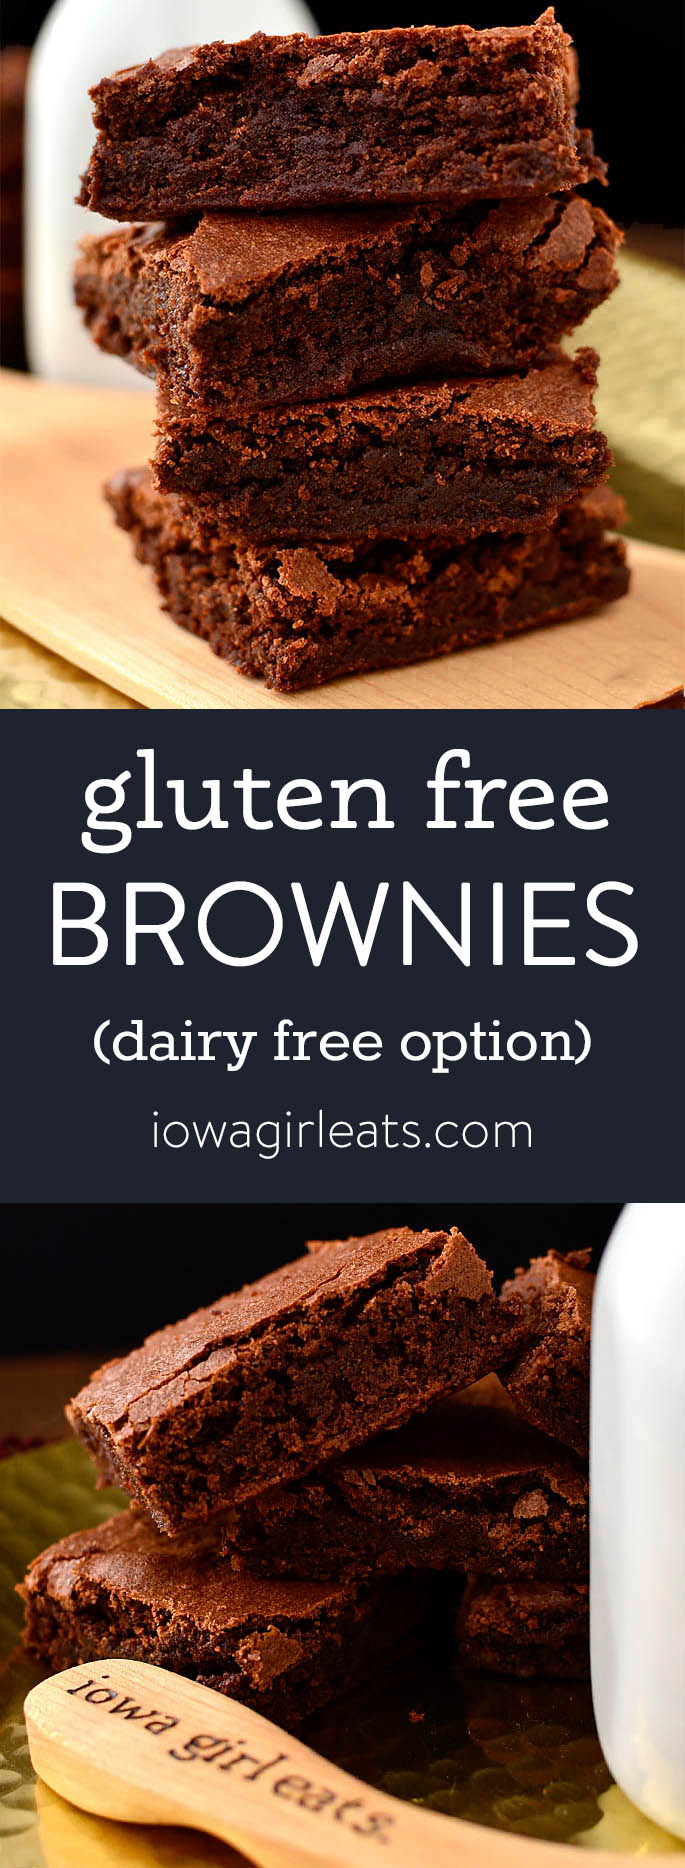 Gluten-free brownies with dairy-free option